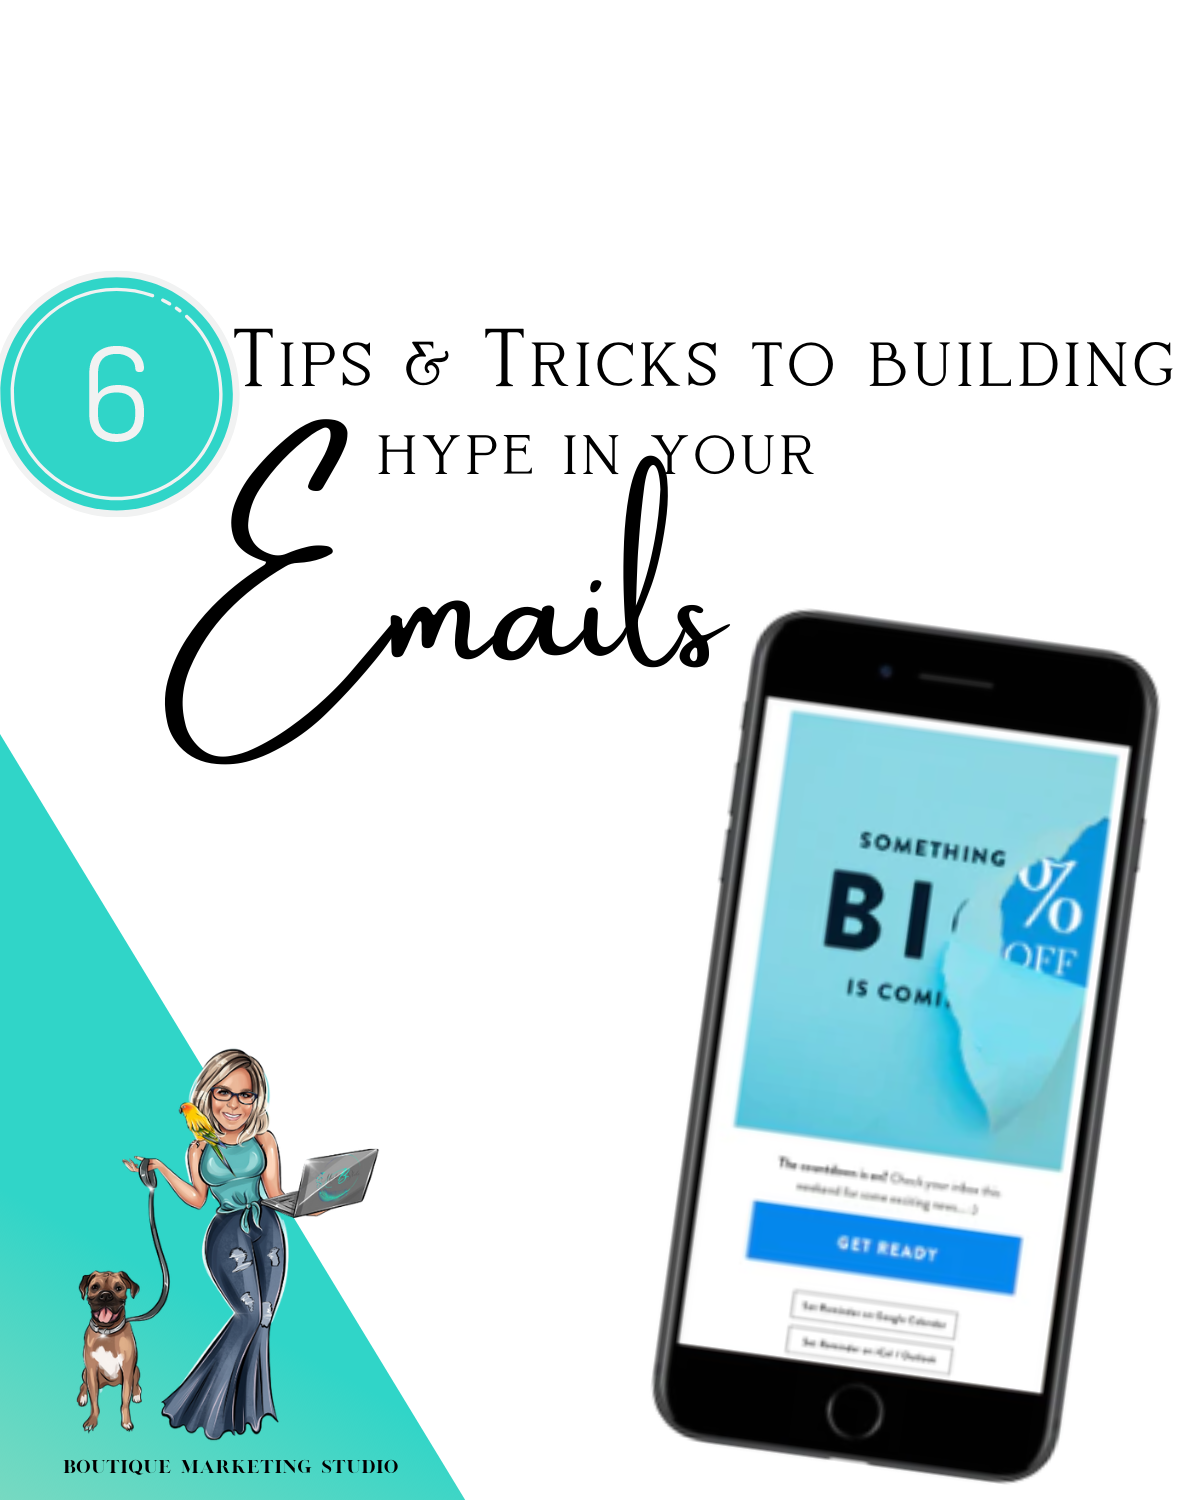 6 Tips & Tricks to building hype in your emails!